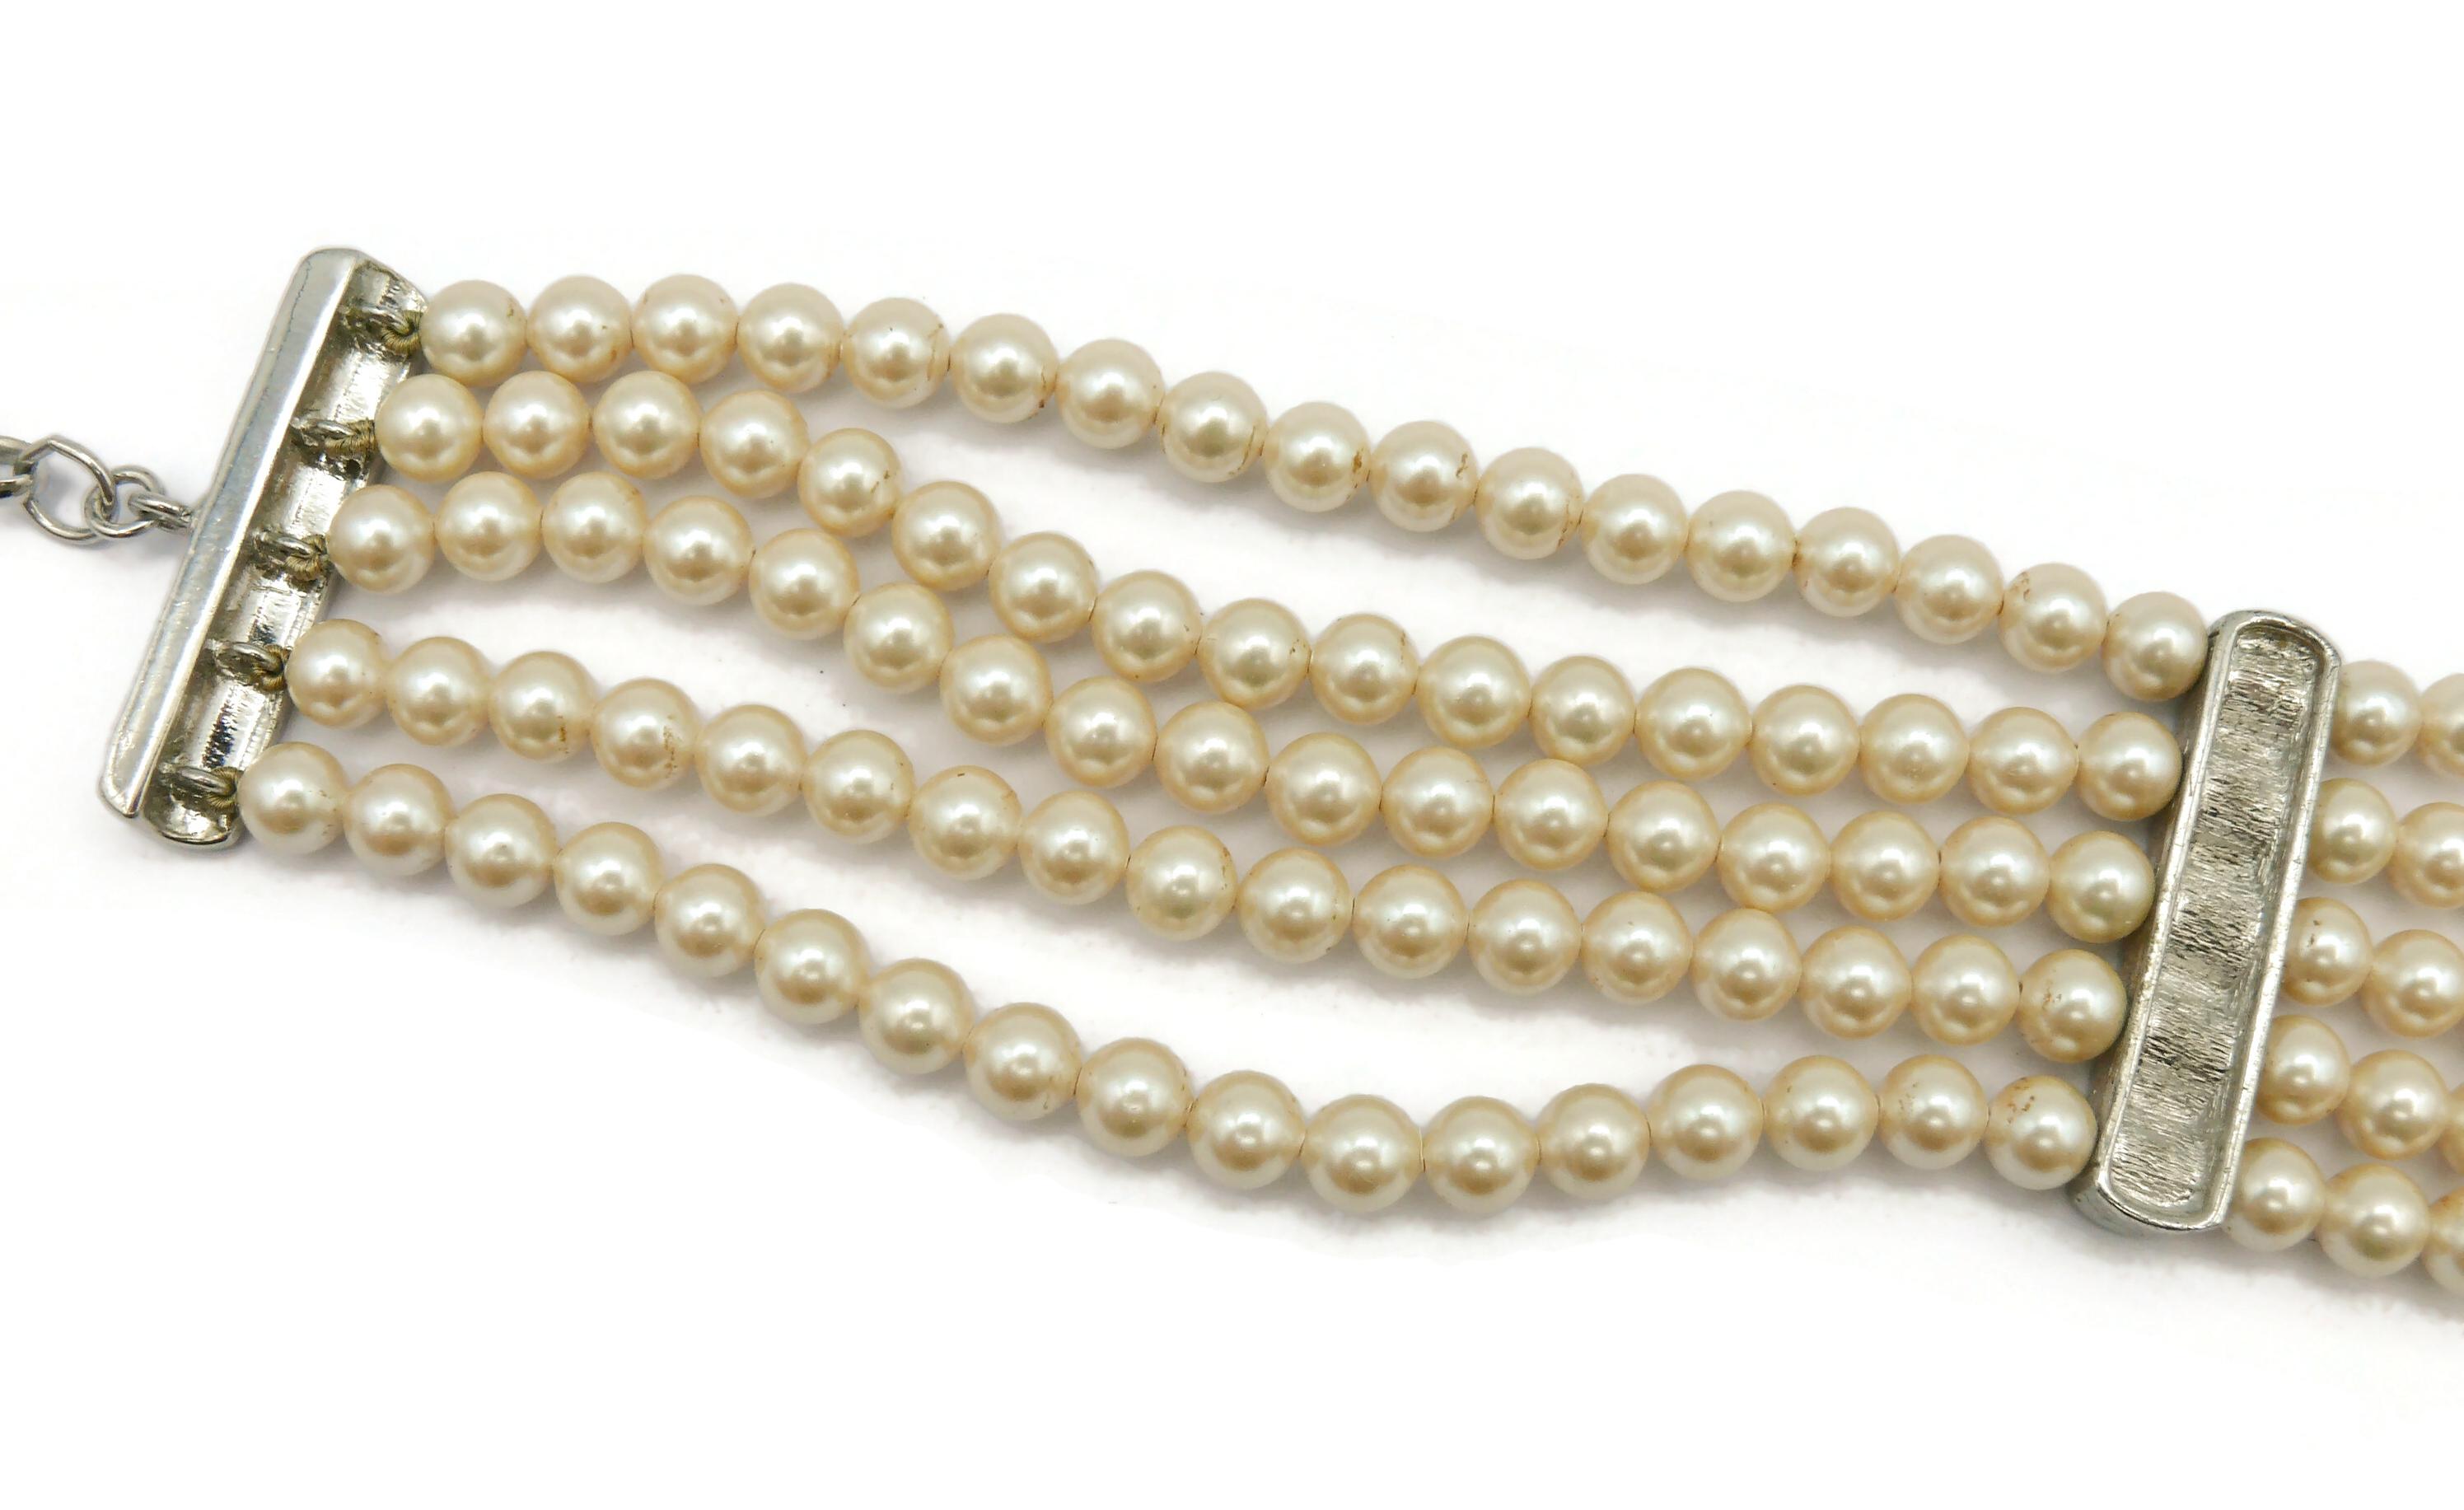 CHRISTIAN DIOR Vintage Multi-Strand Faux Pearl Necklace For Sale 7